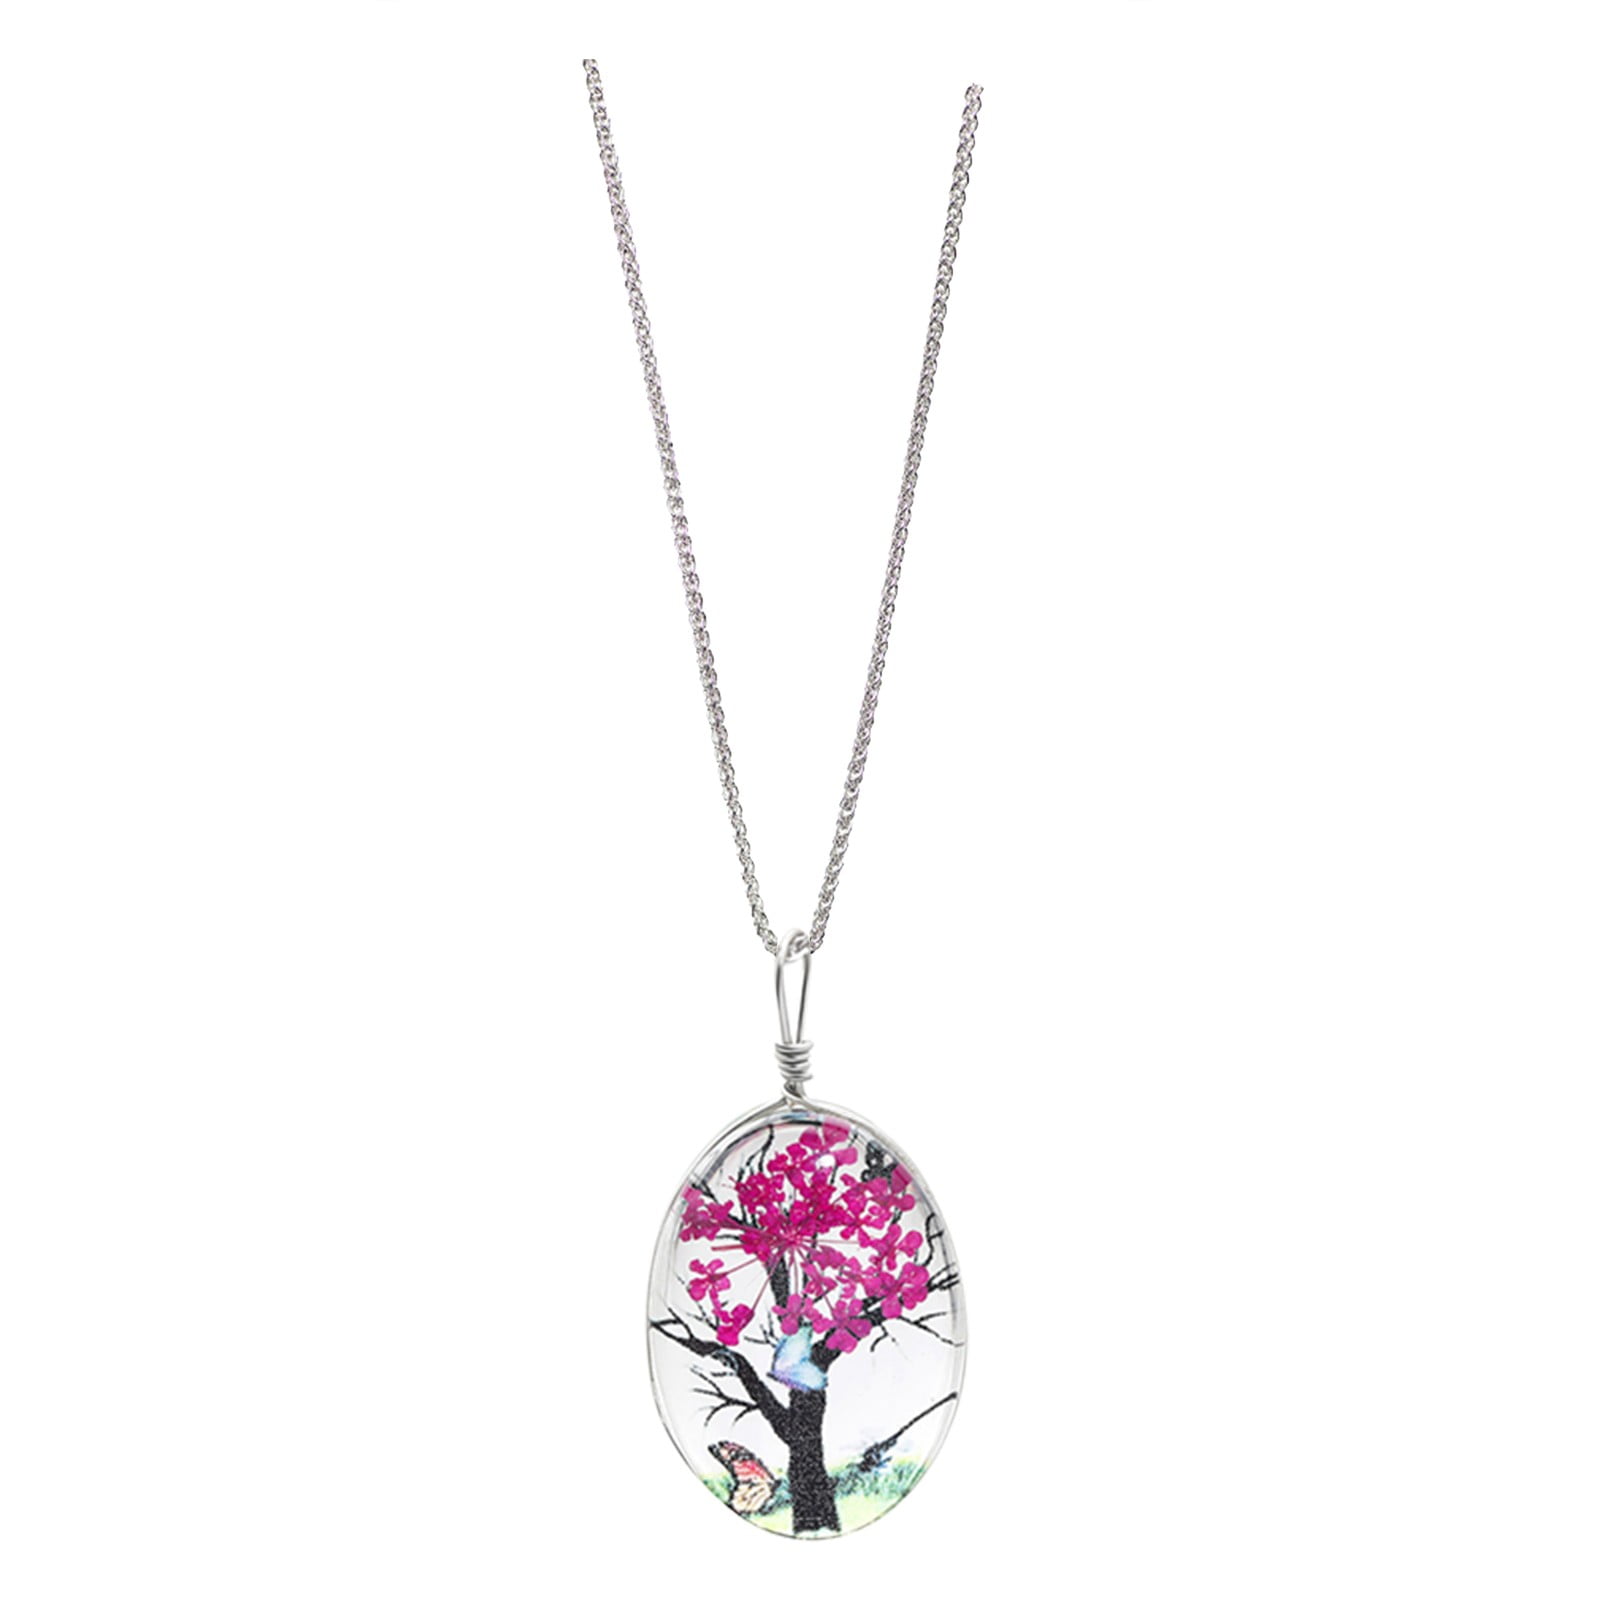 wearable art glass photo jewelry American Cherry Blossom pendant necklace